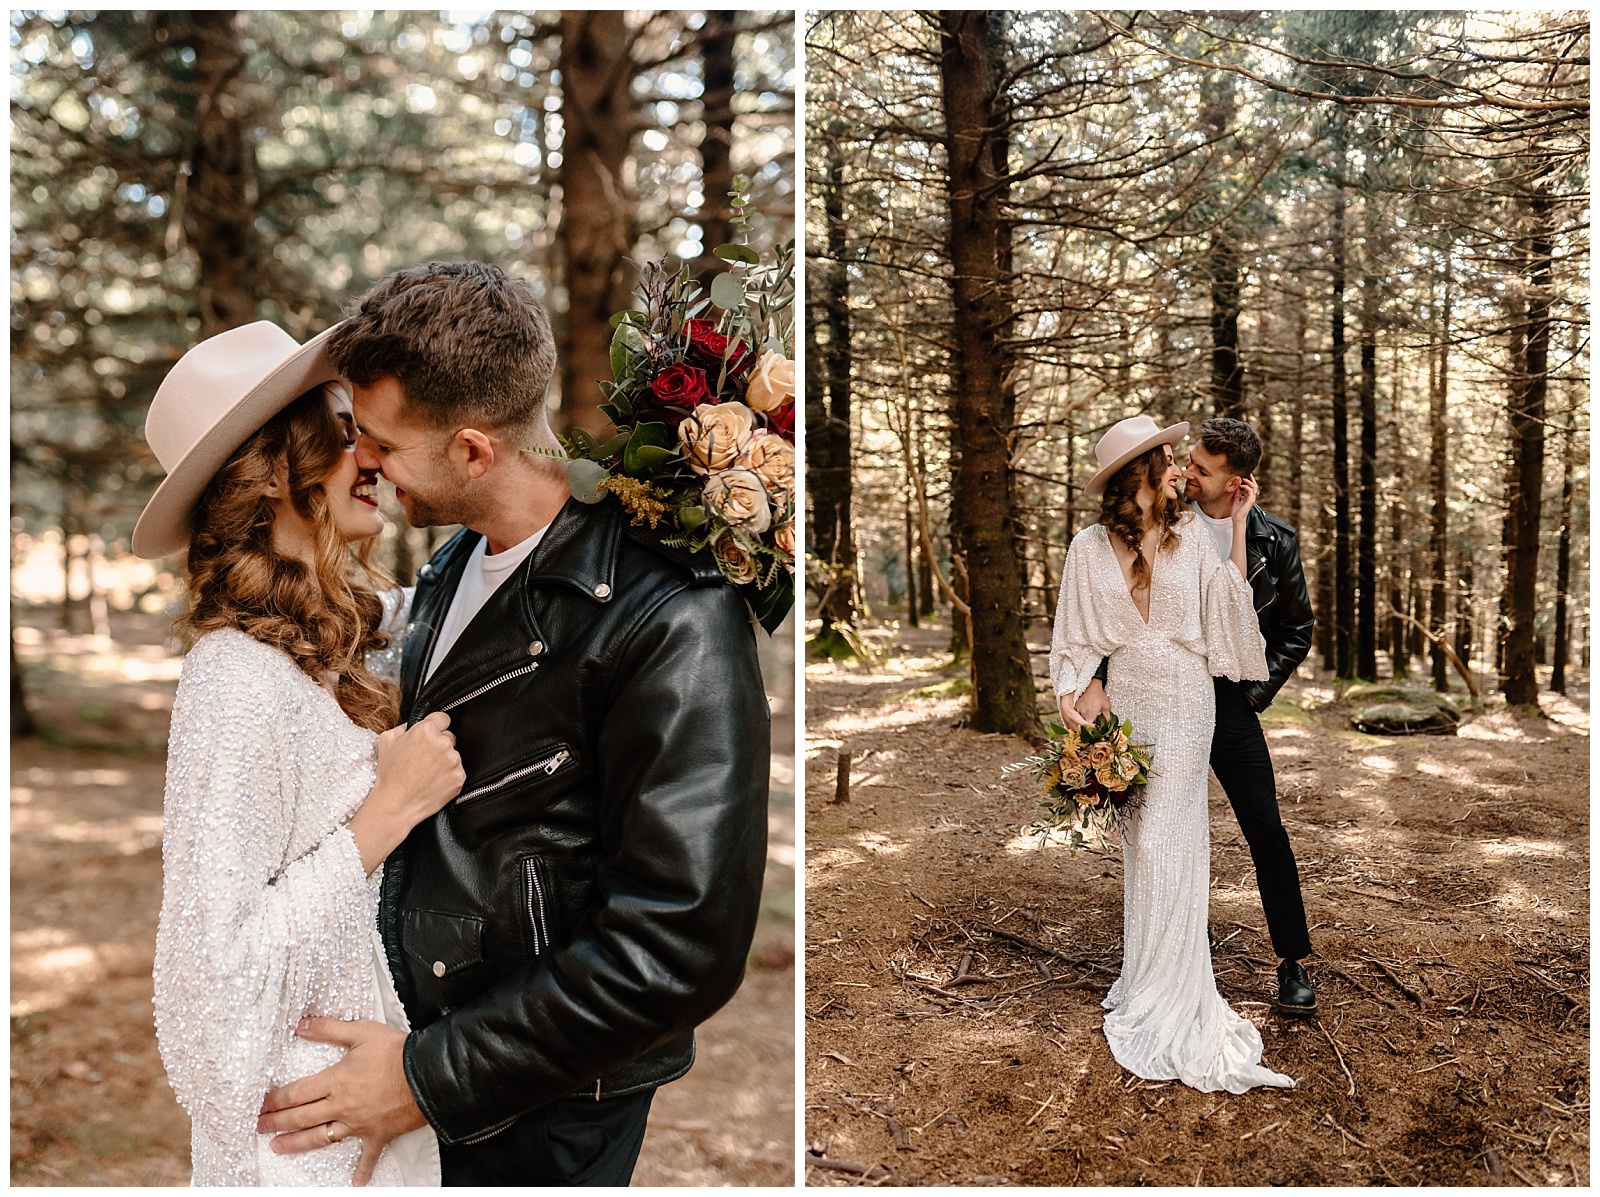 collage of wedding photos from intimate wooded elopement session